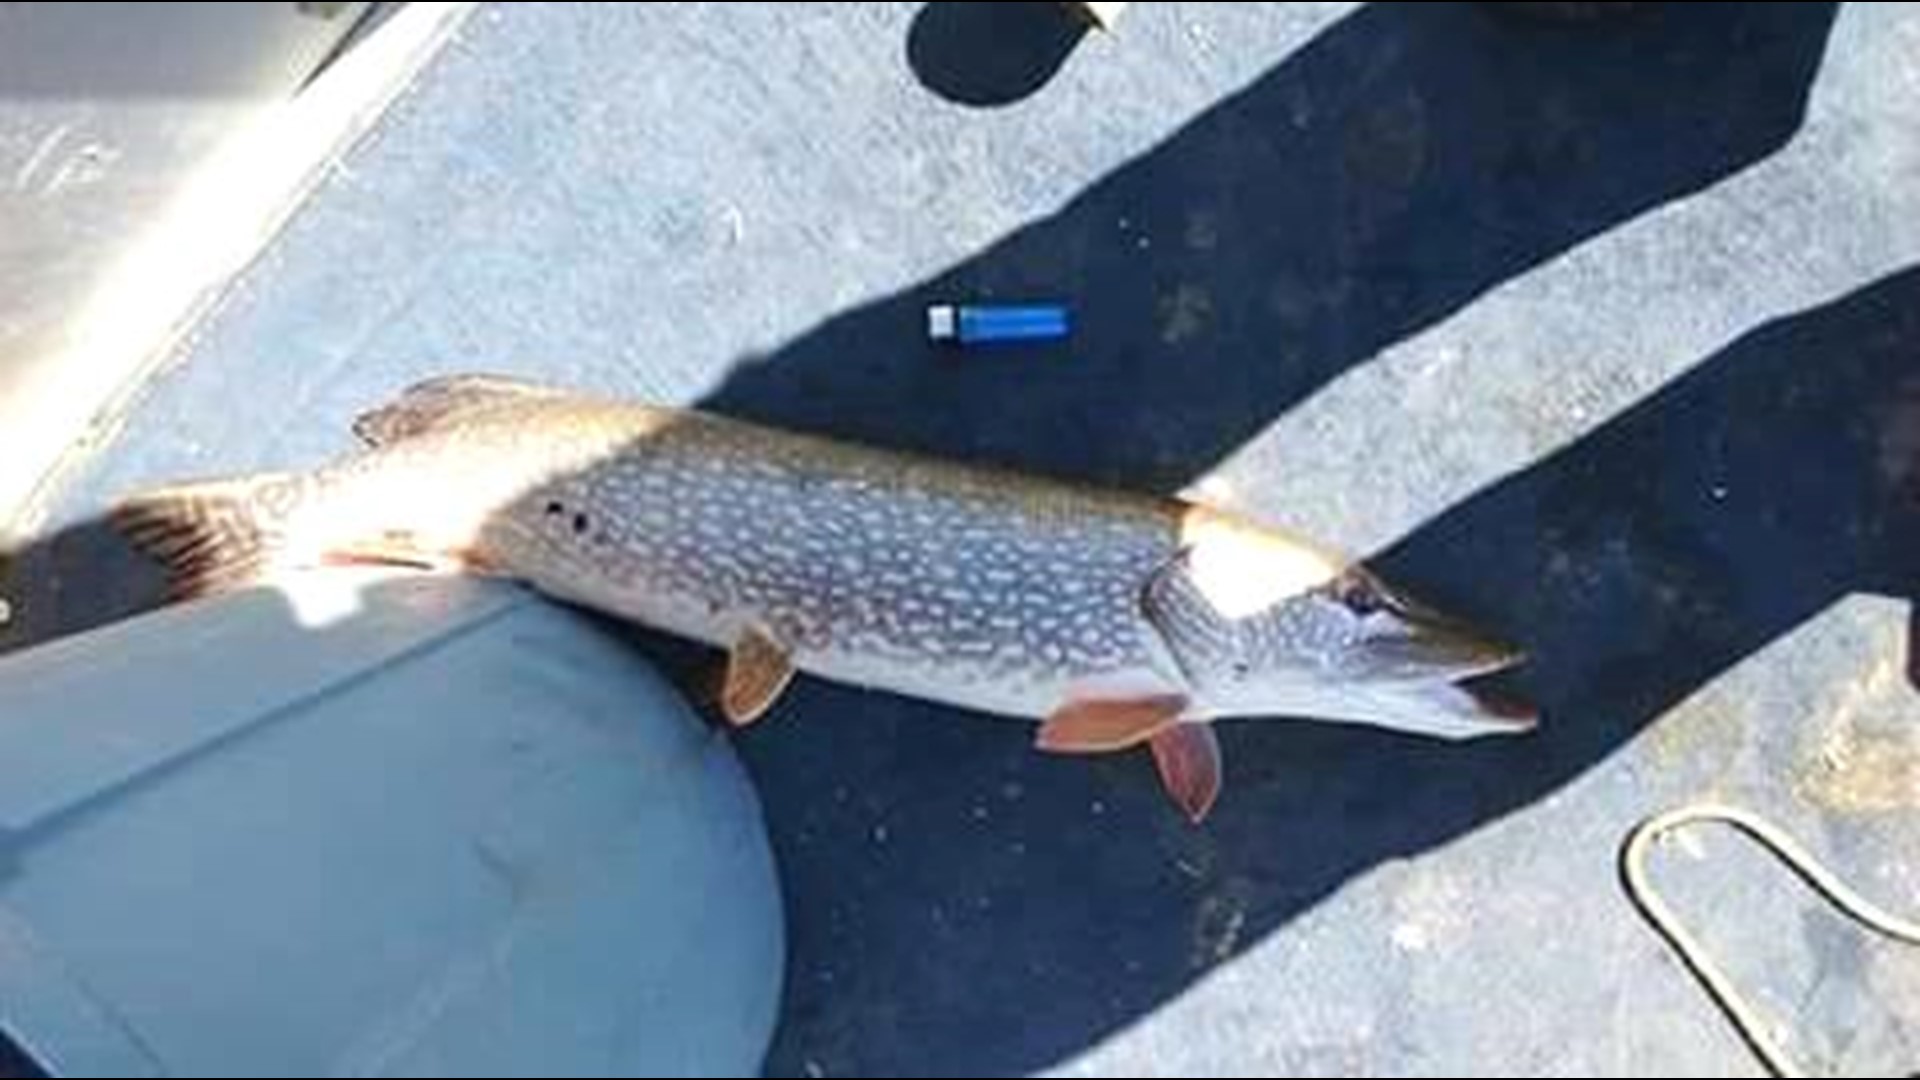 Anglers can earn $20 per fish by catching illegally introduced northern pike at Kenney Reservoir in northwestern Colorado.